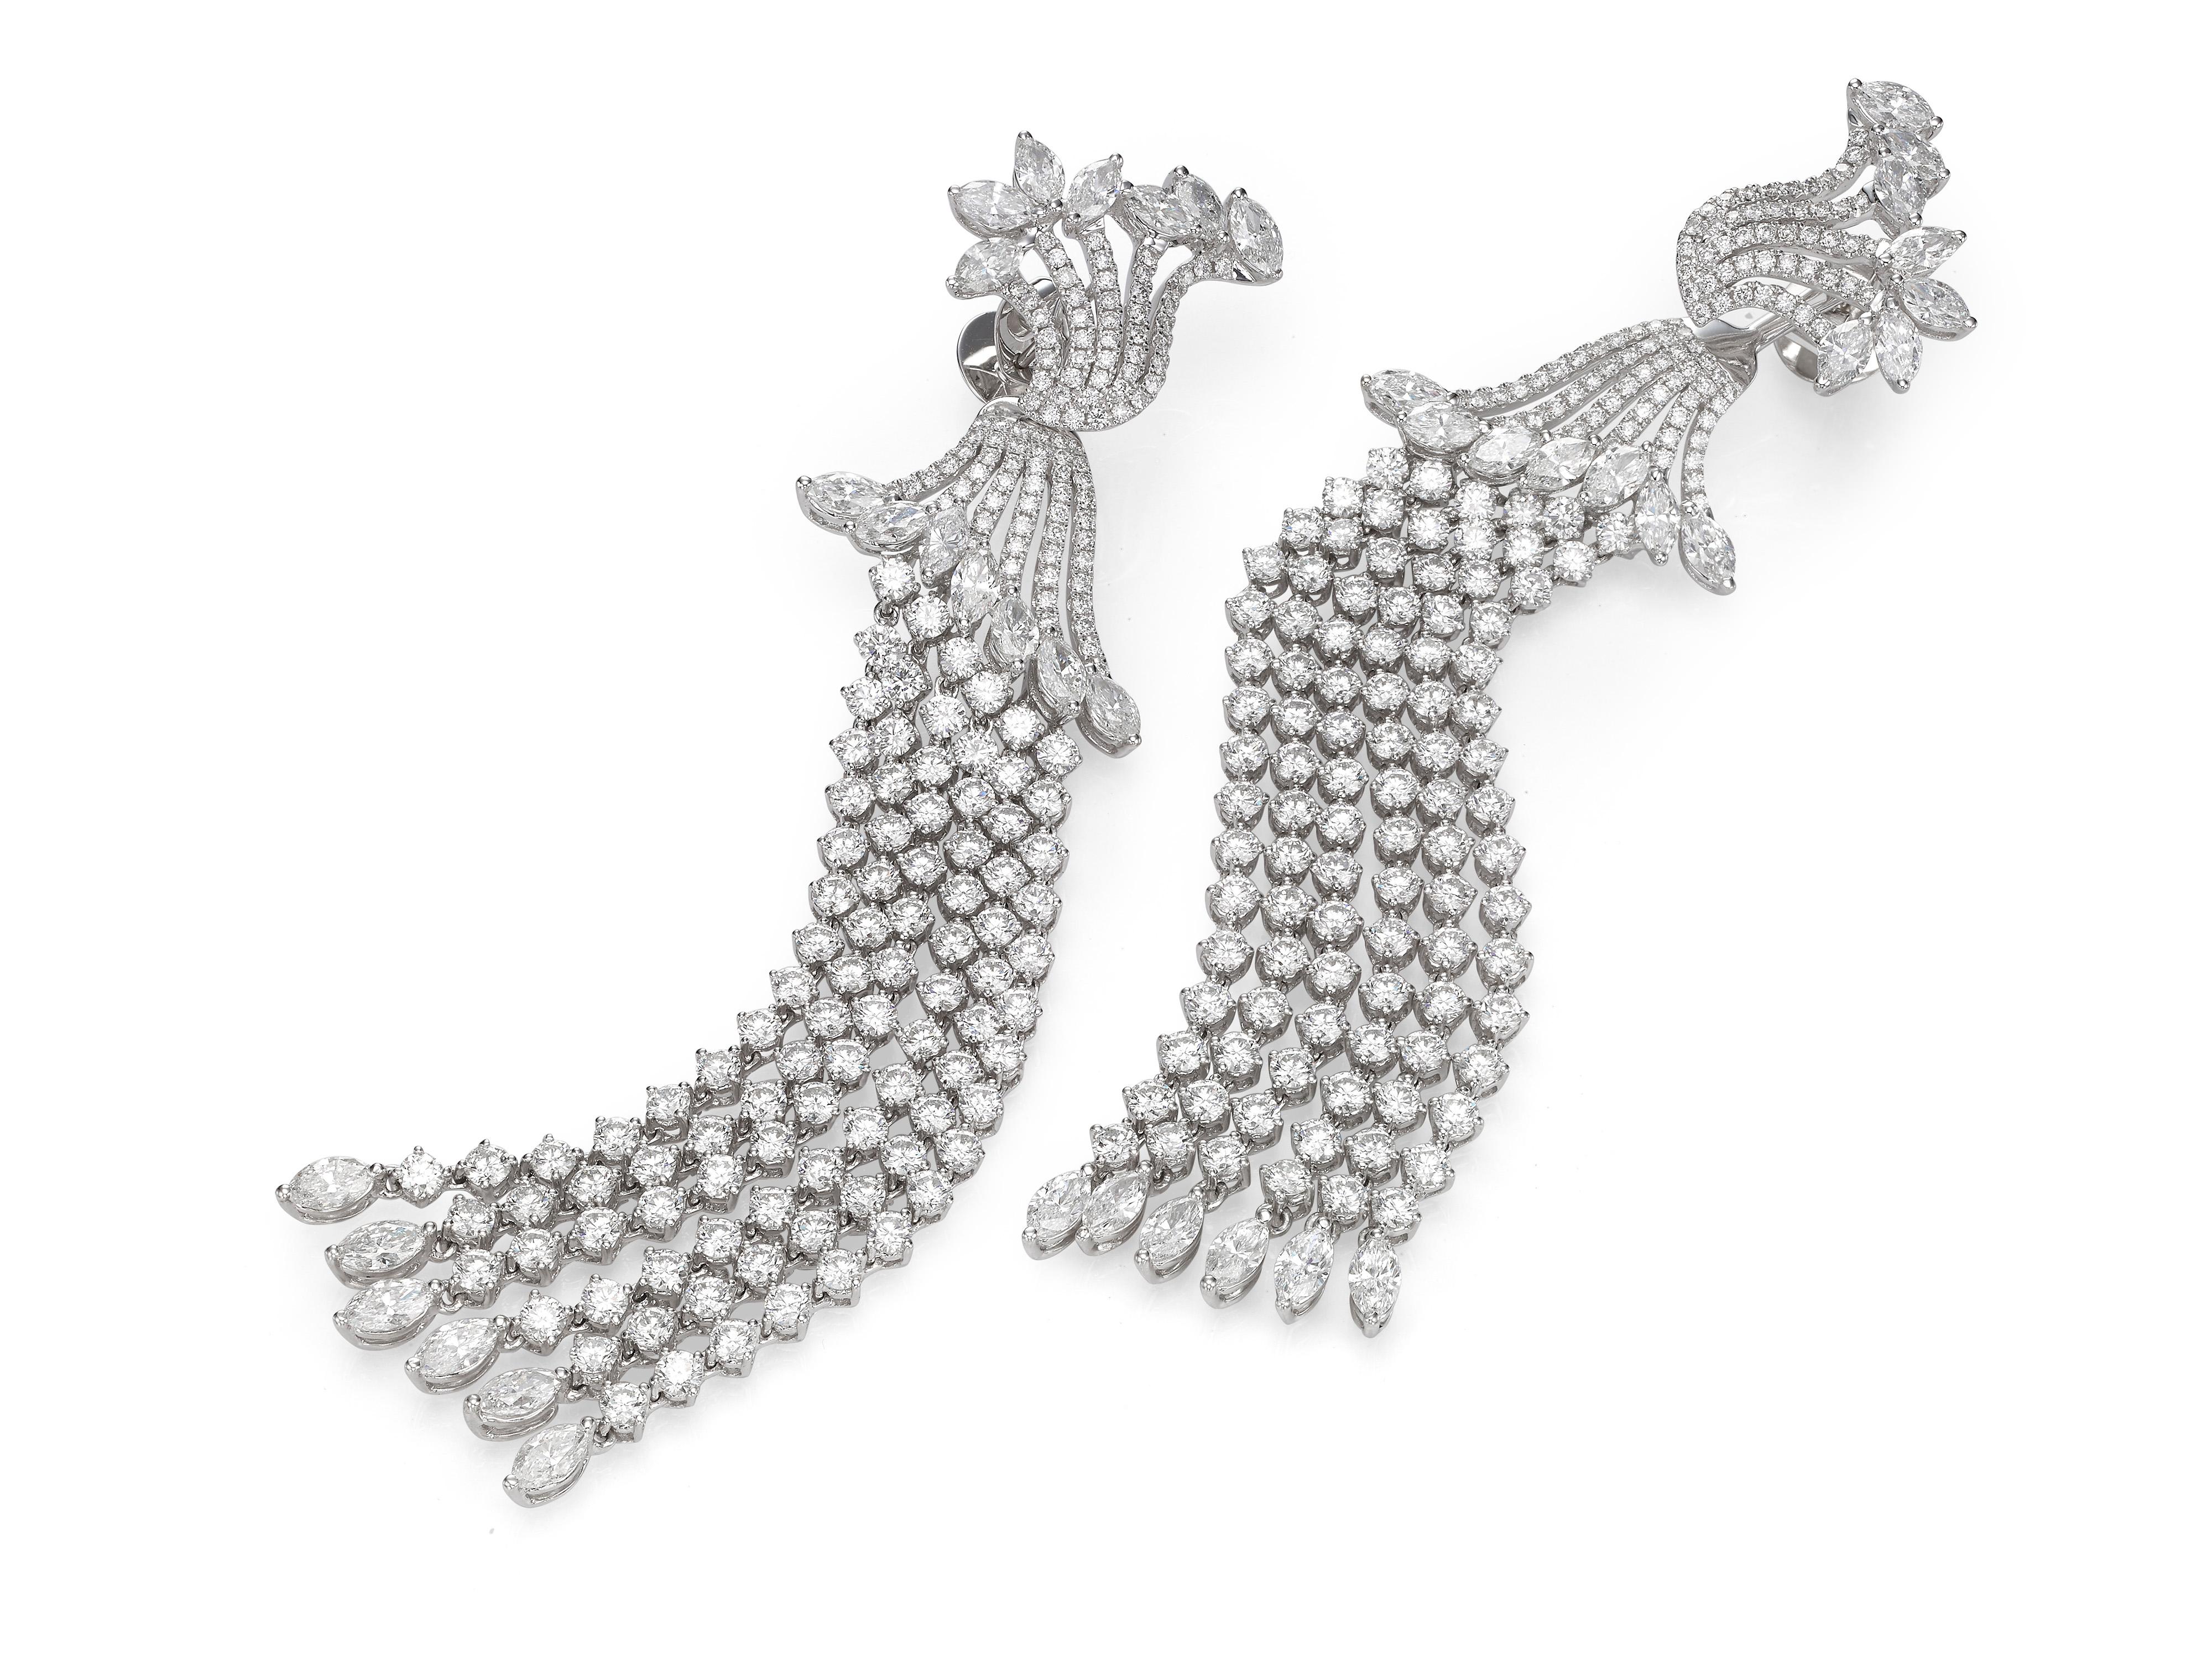 This pair of Butani diamond chandelier tassel earrings feature an ornate floral design encrusted with round brilliant-cut and marquise diamonds.  Skillfully made in 18K white gold, the shoulder-length diamond tassels are designed to dance and